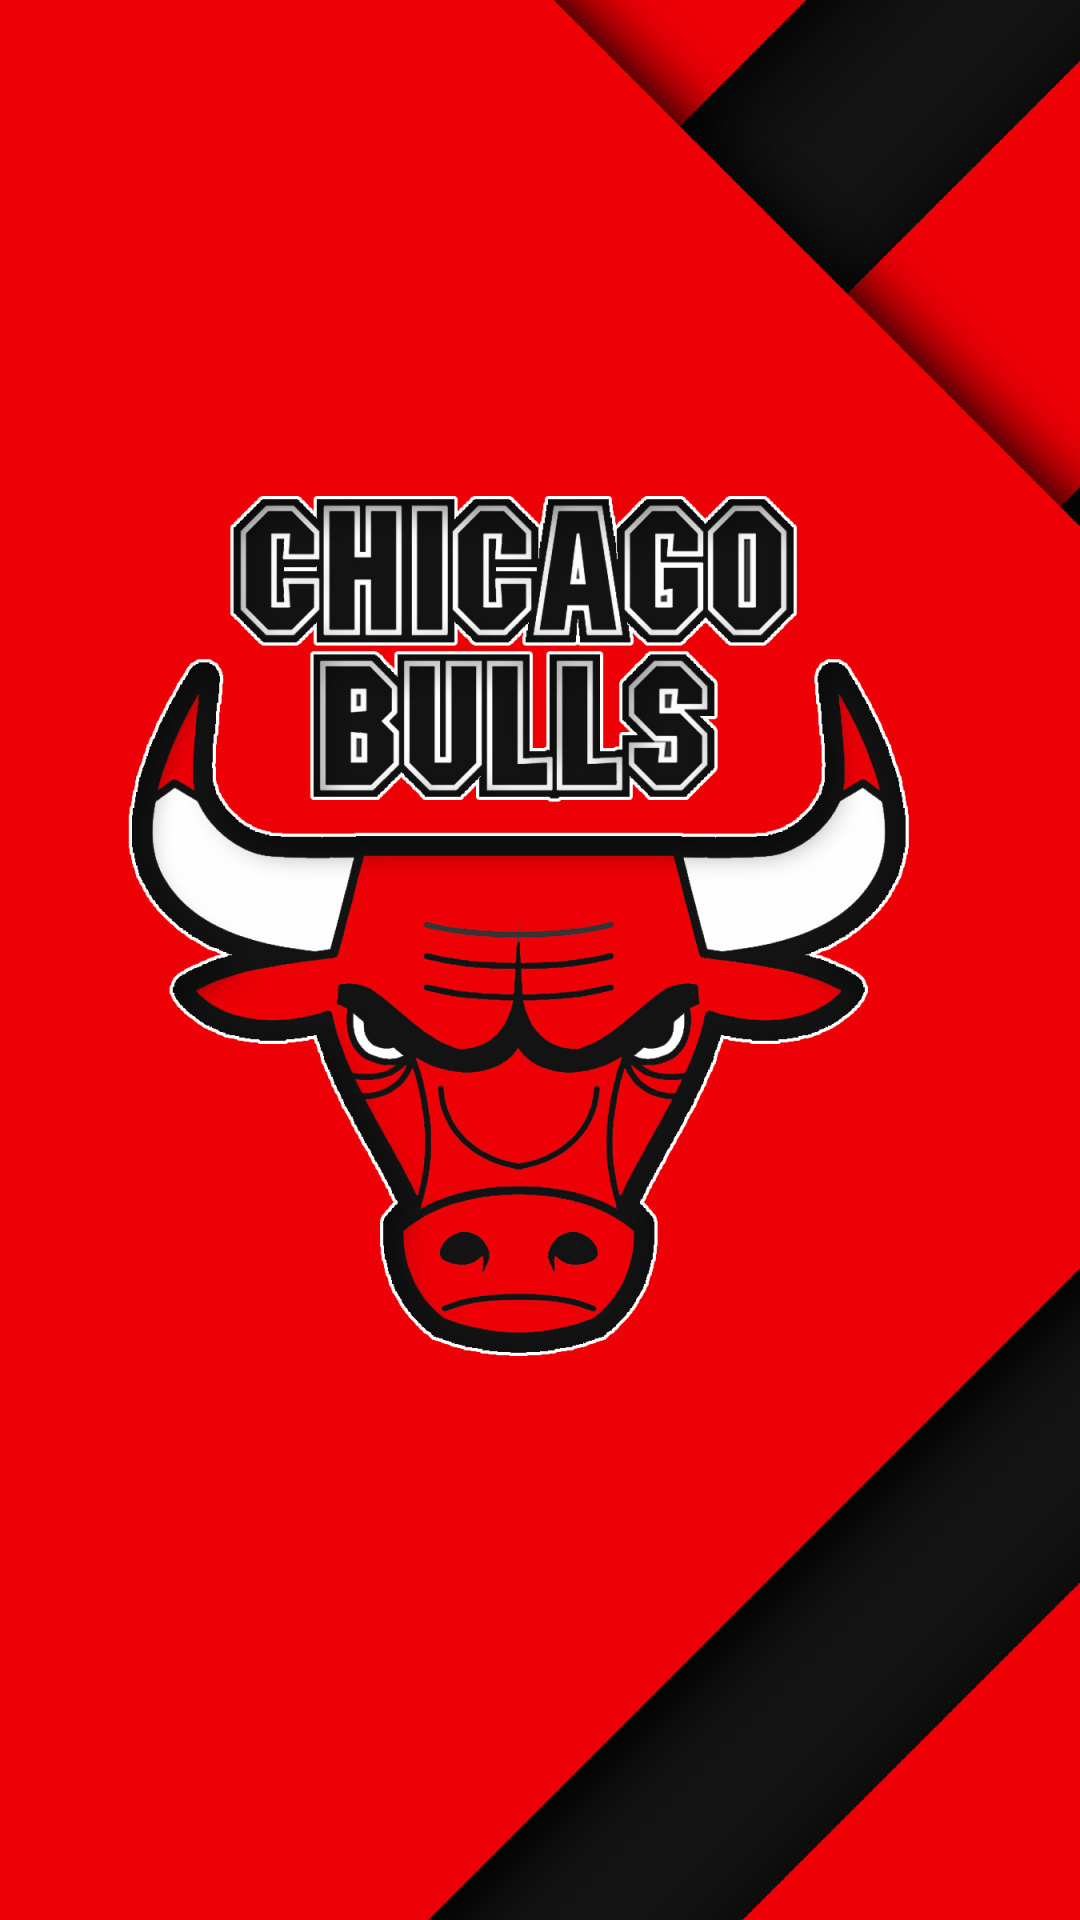 Chicago Bulls: The team's official logo is a red bull, The team was founded on January 16, 1966. 1080x1920 Full HD Background.